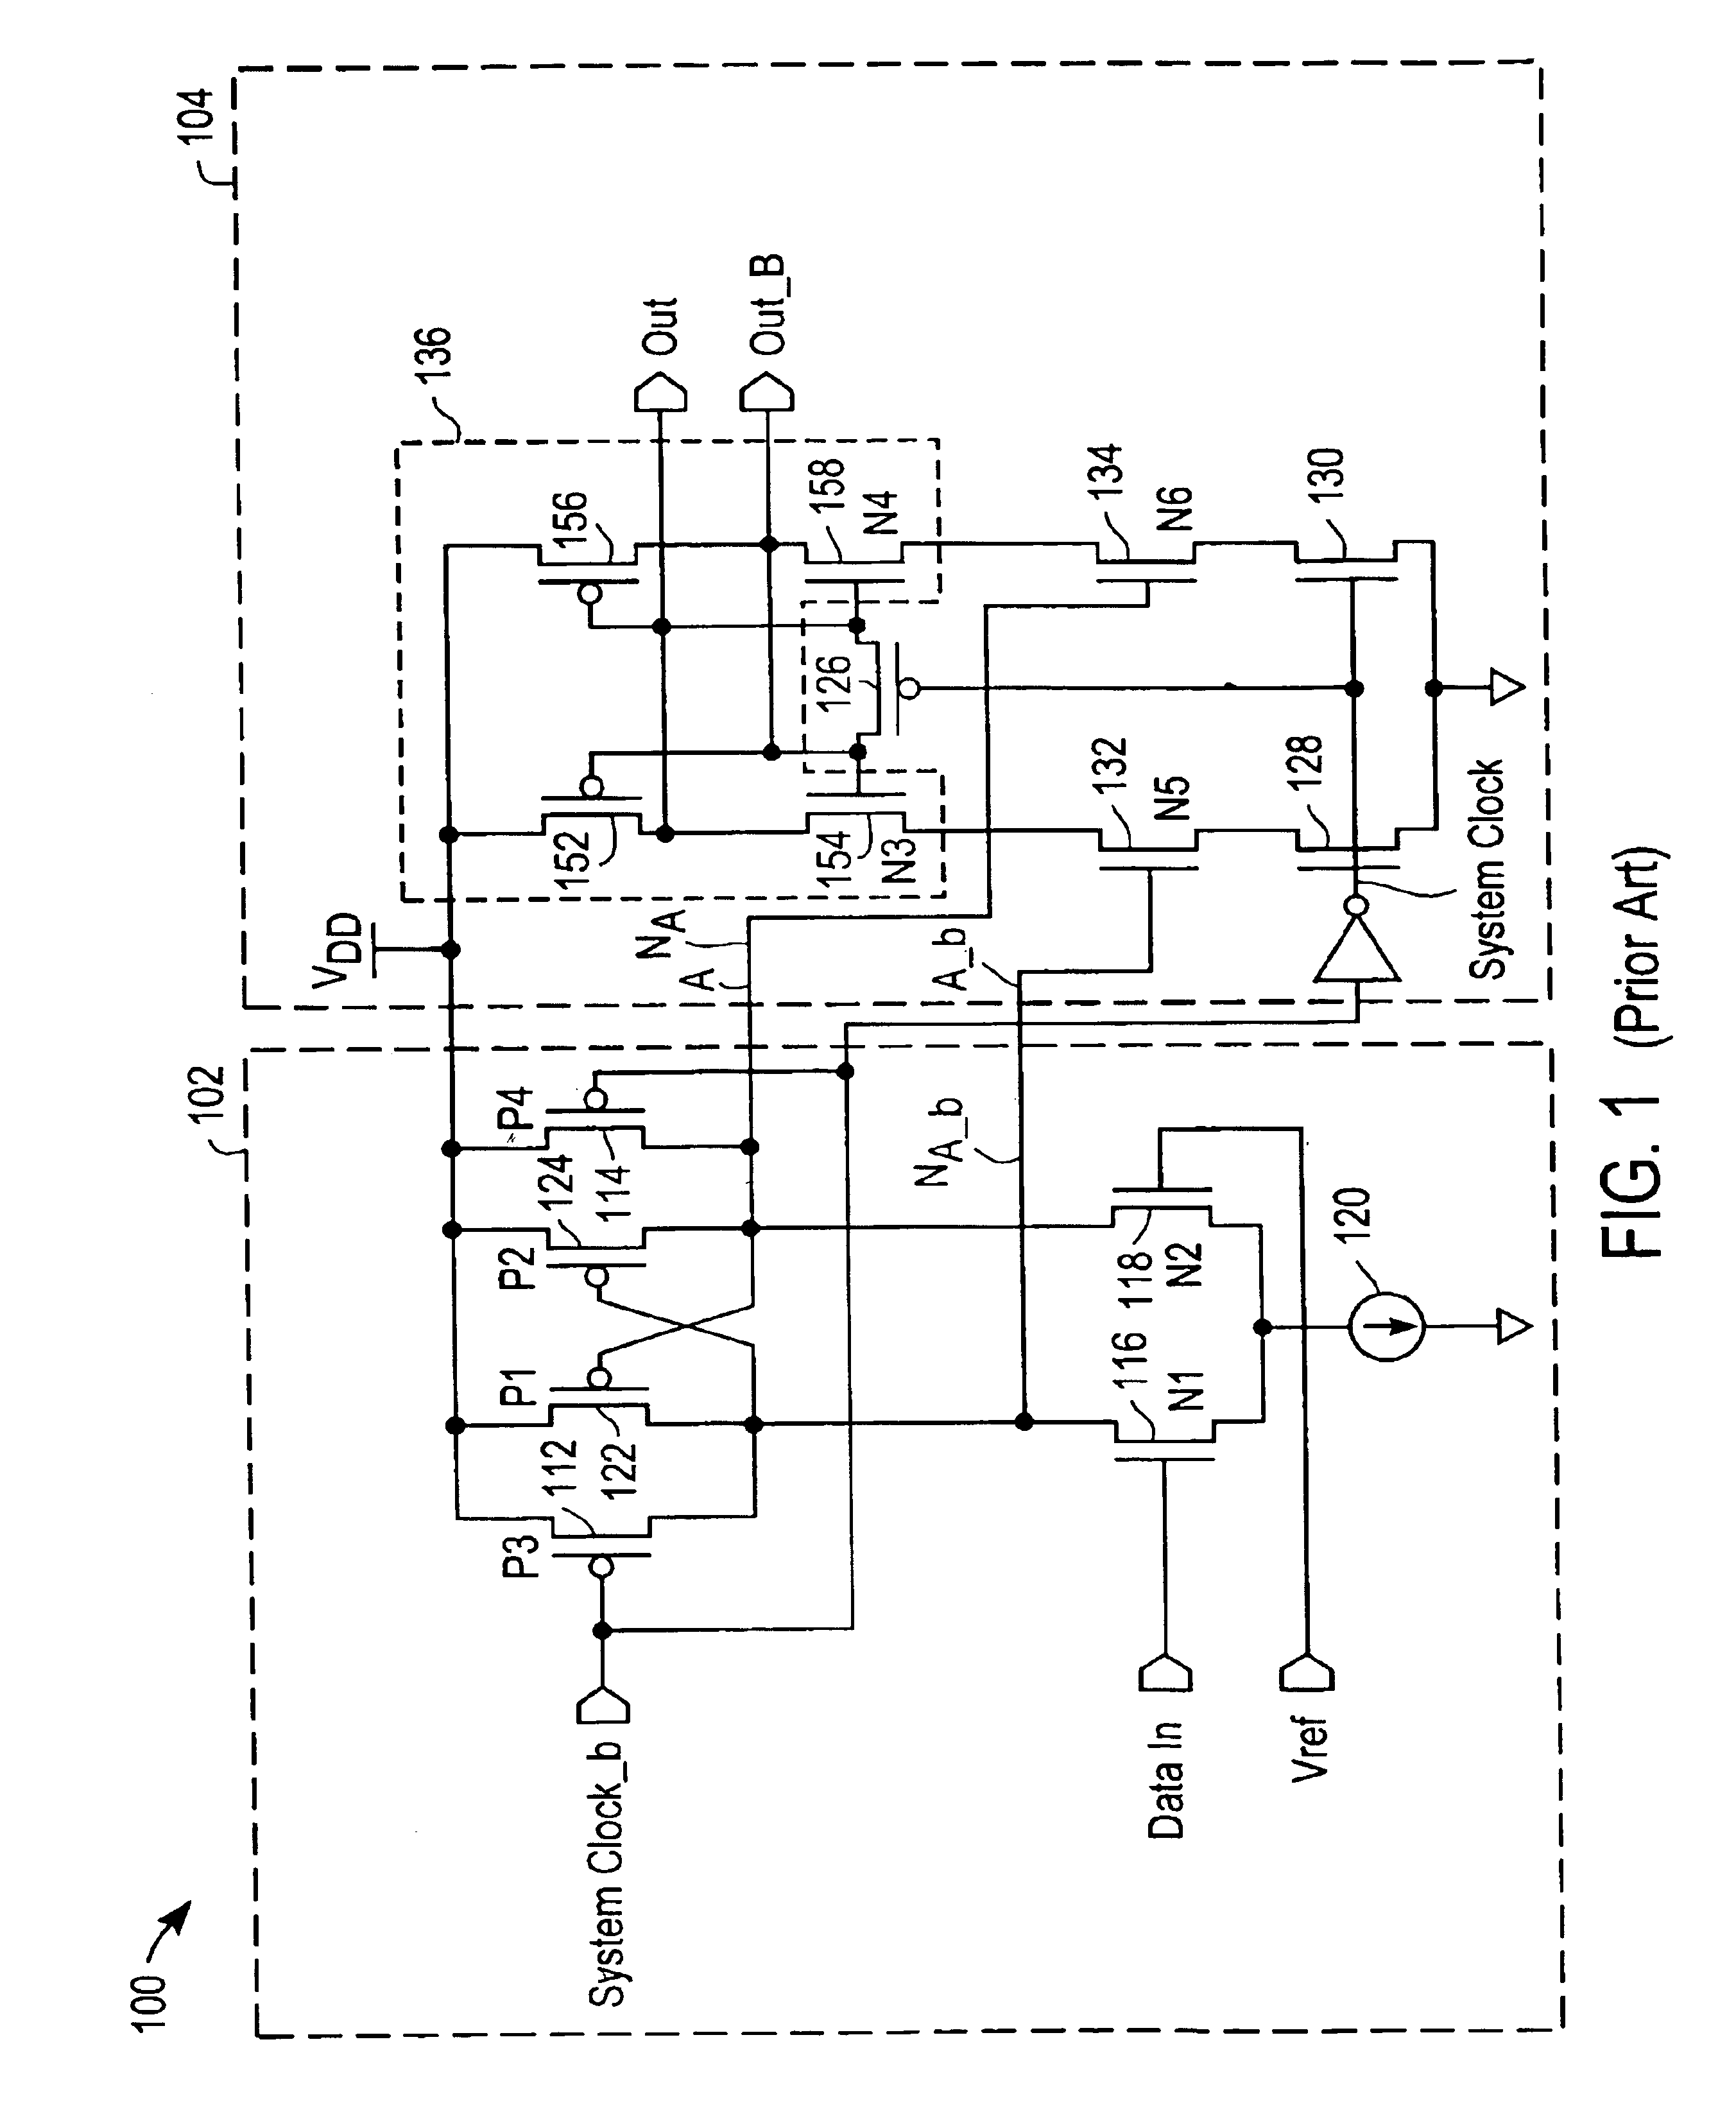 Method and apparatus for receiving high speed signals with low latency